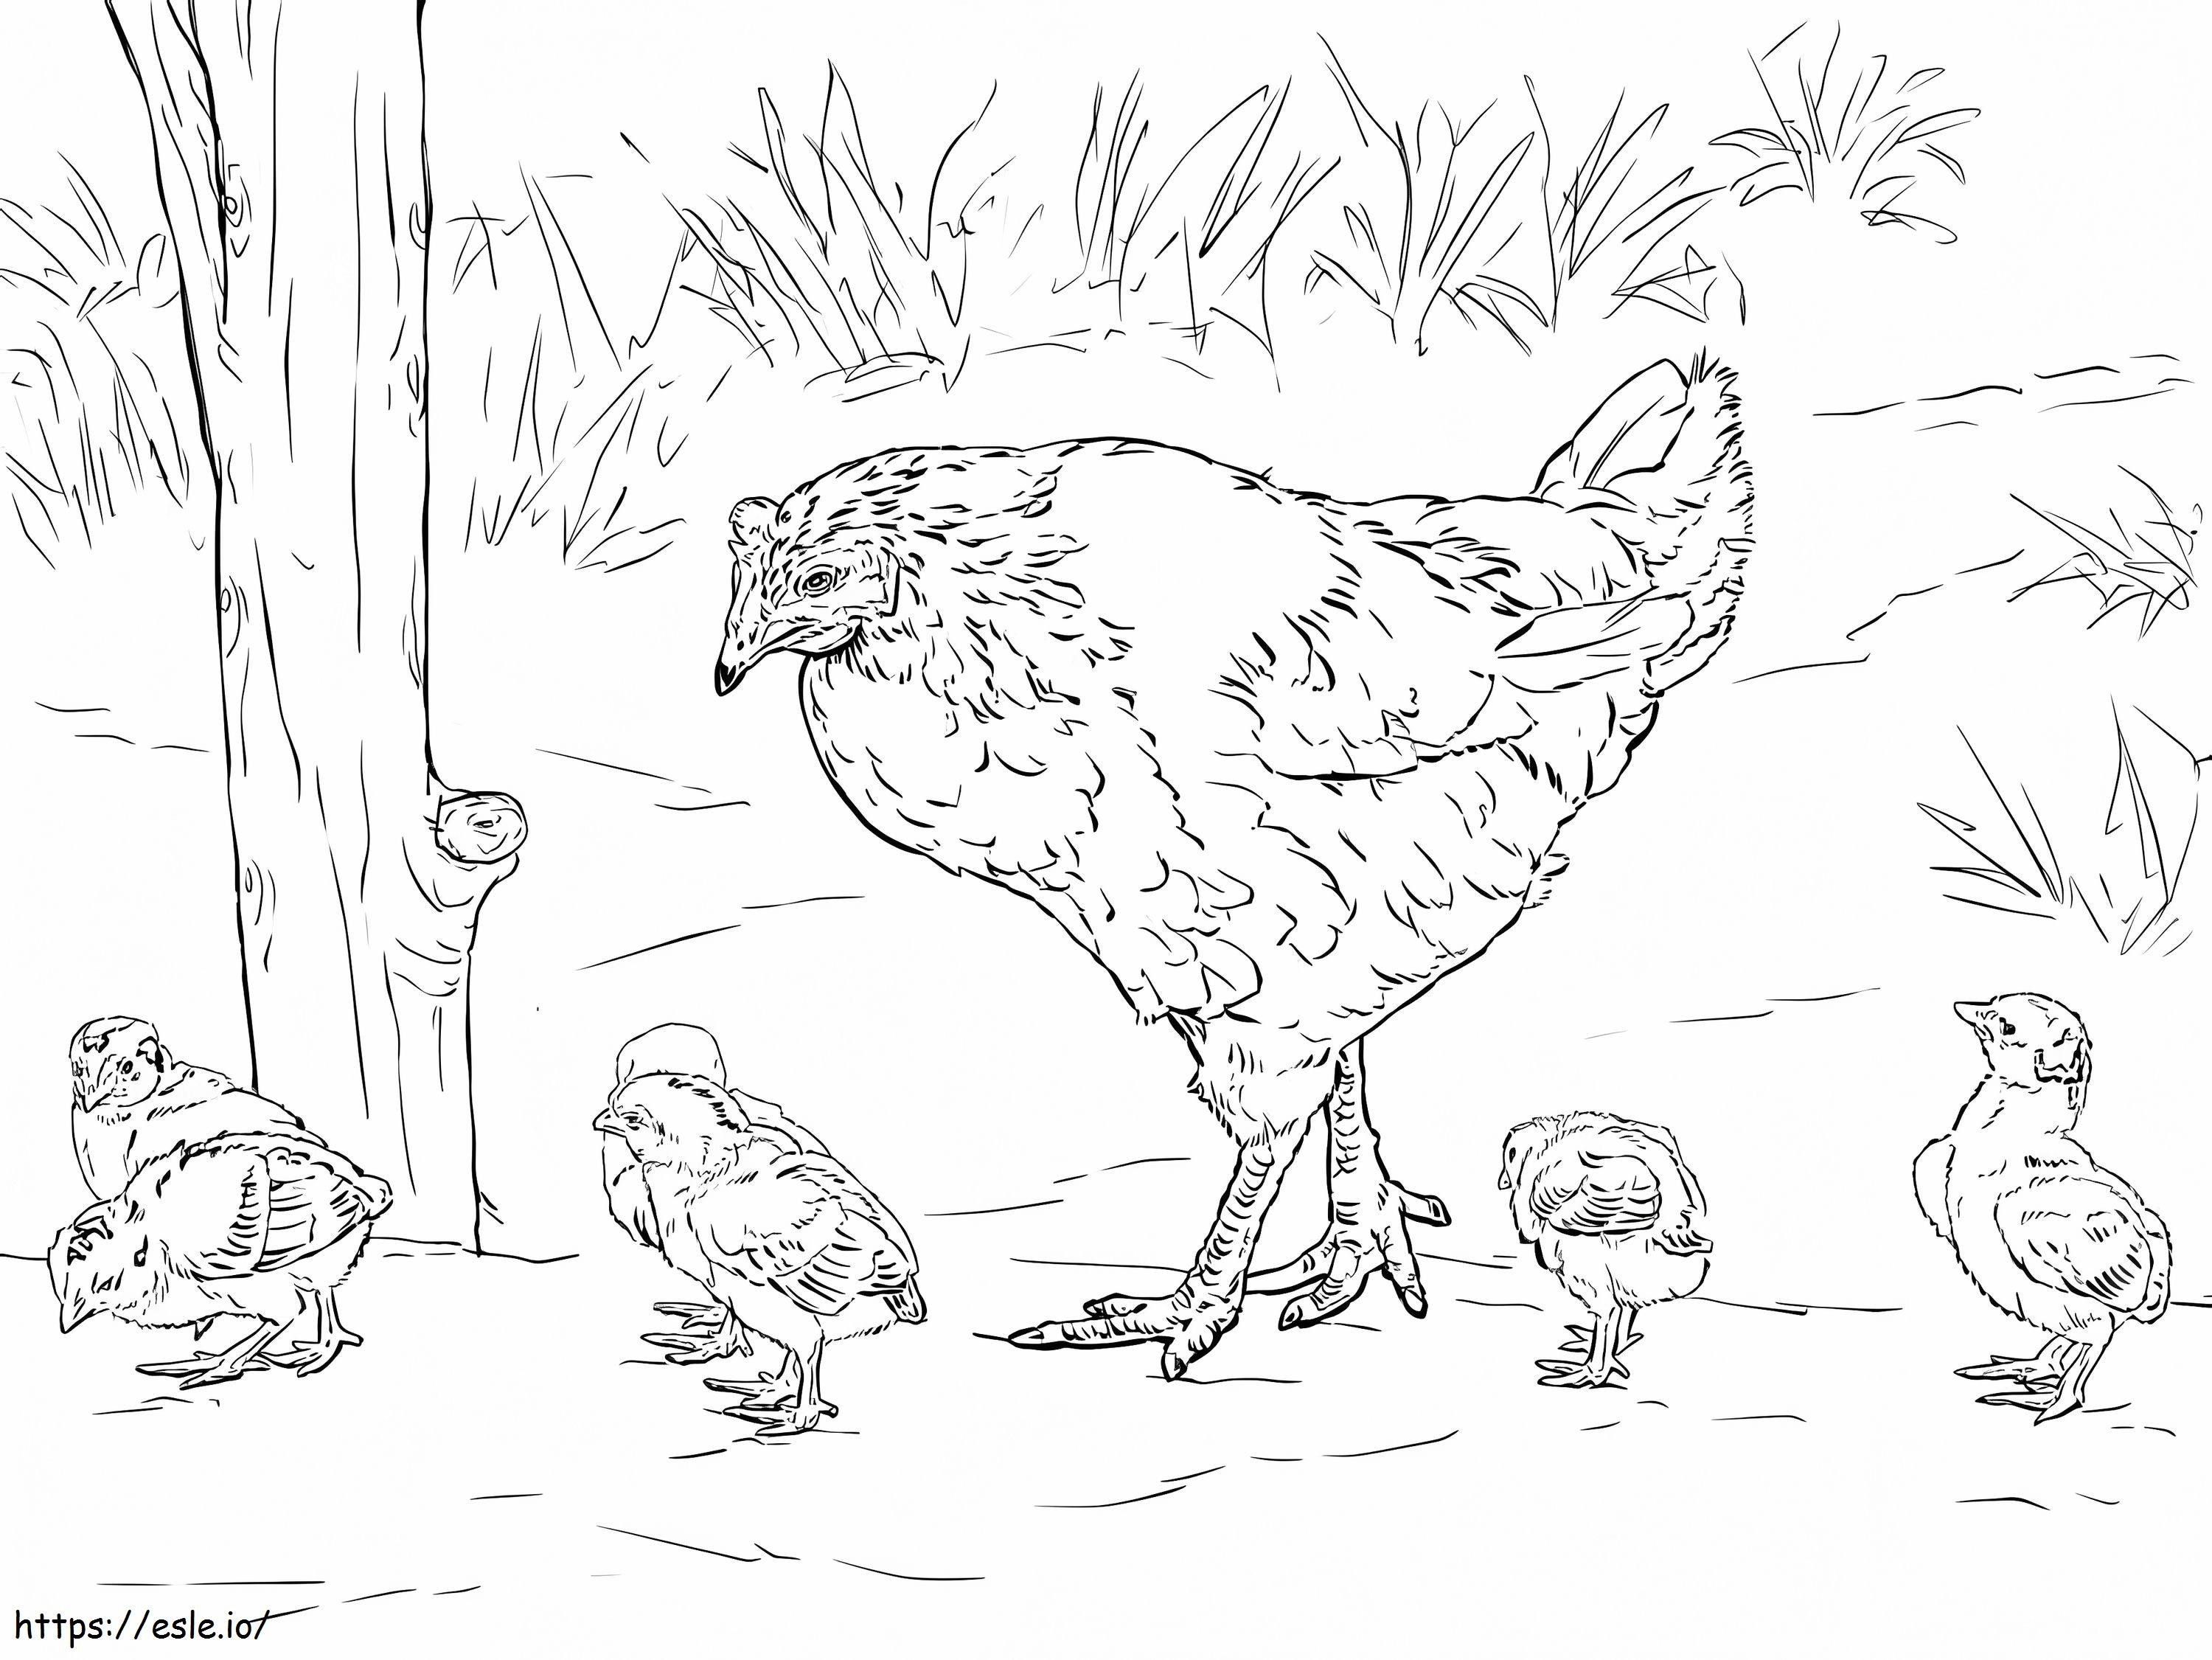 Hen With Chicks coloring page